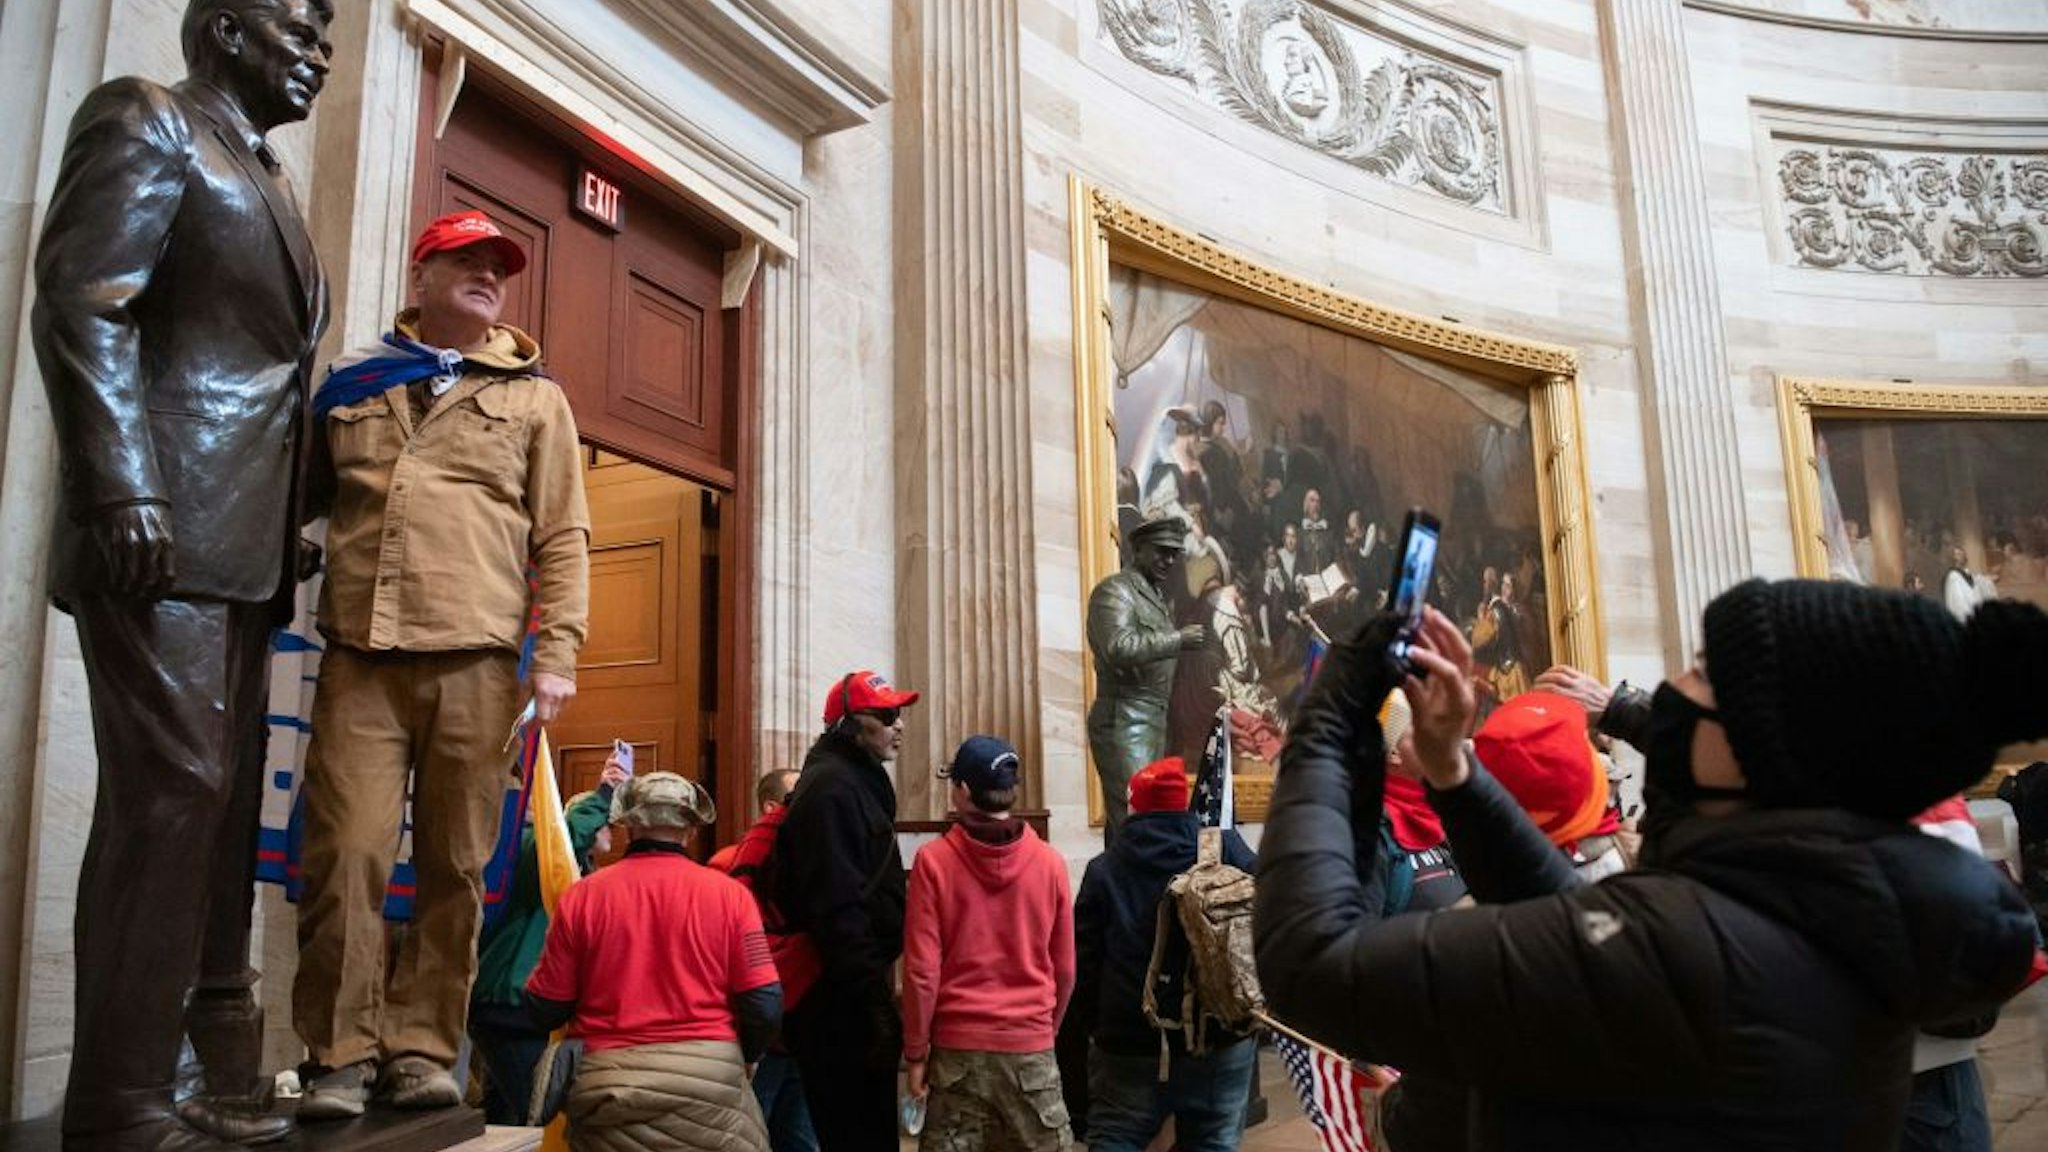 Supporters of US President Donald Trump pose with statues inside the Rotunda after breaching the US Capitol in Washington, DC, January 6, 2021.